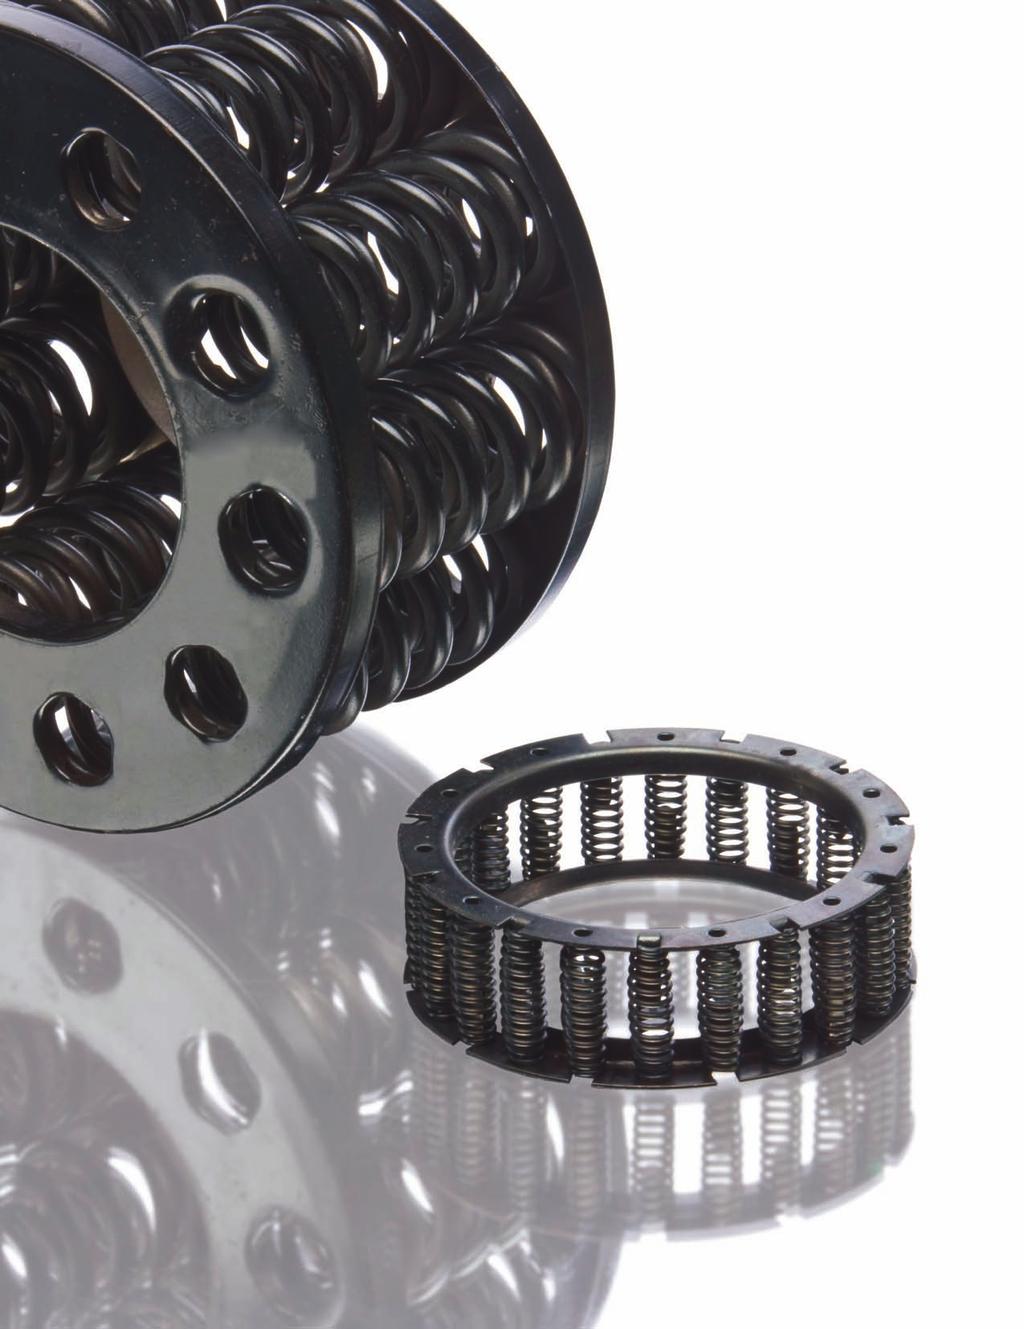 SPRINGS WIRE FORMS STAMPINGS CLUTCH PACKS RETAINING RINGS Michigan isn t your everyday spring and stamping company.